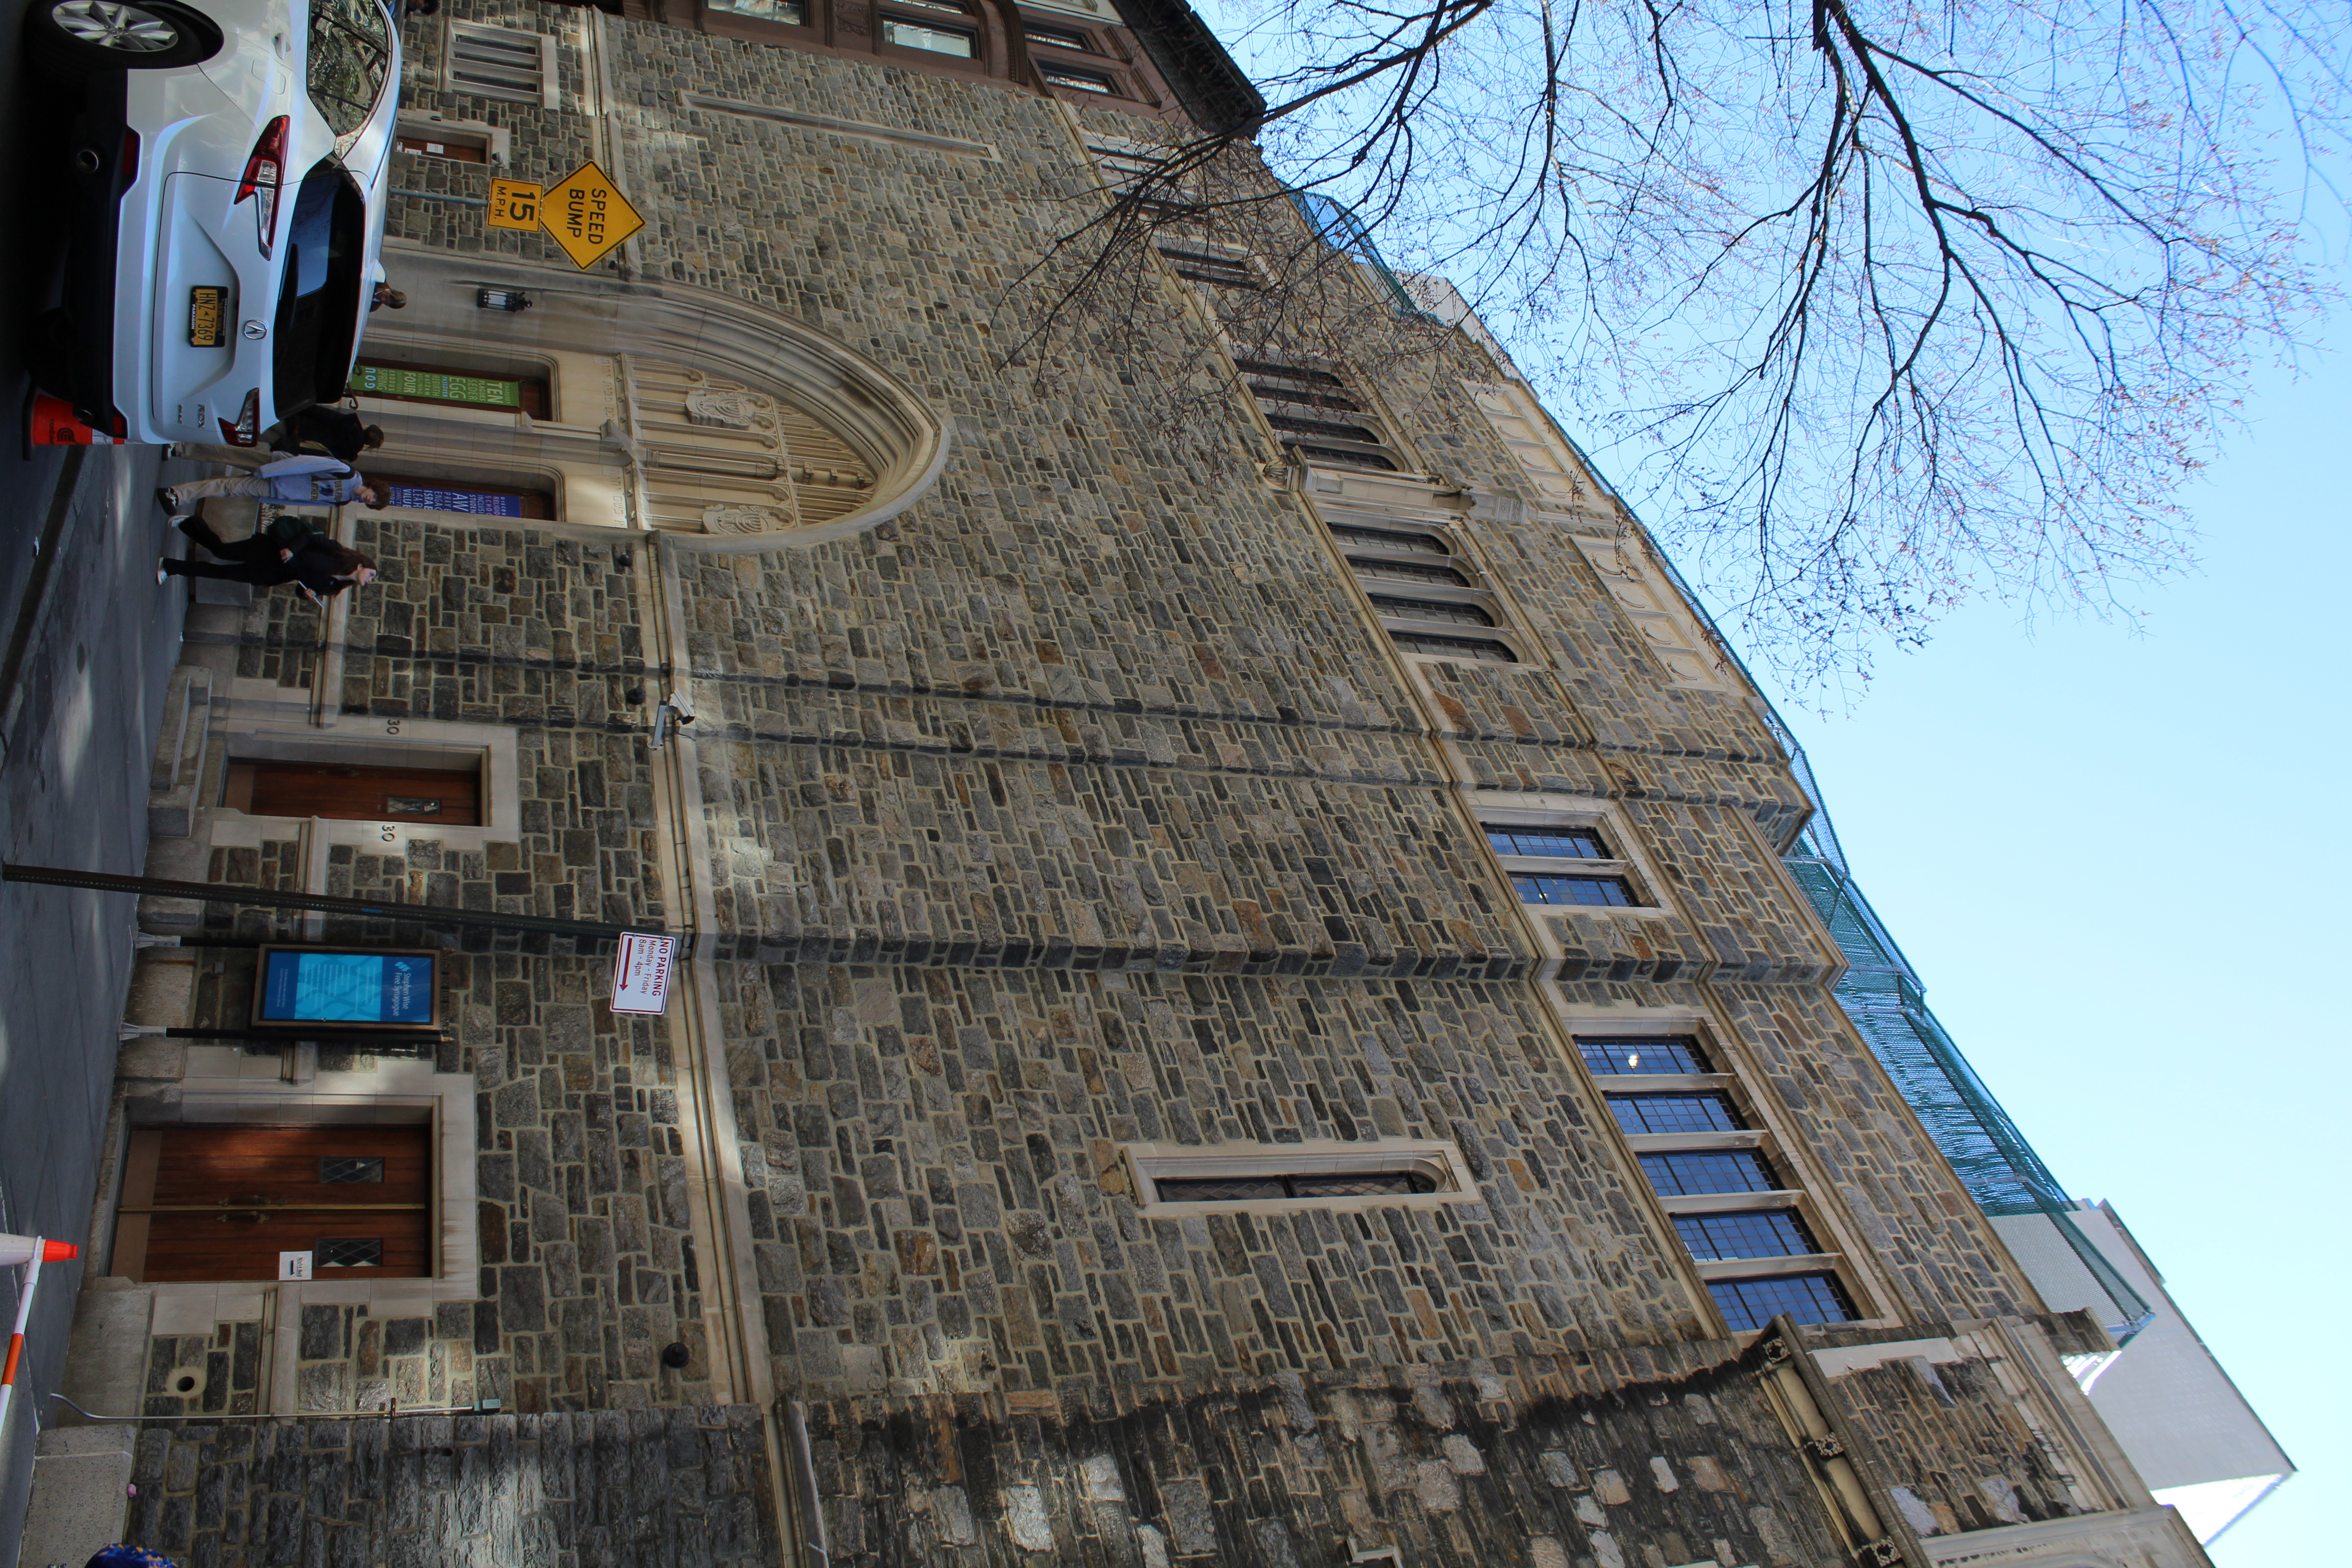 Stephan Wise Free Synagogue: 30 West 68th Street